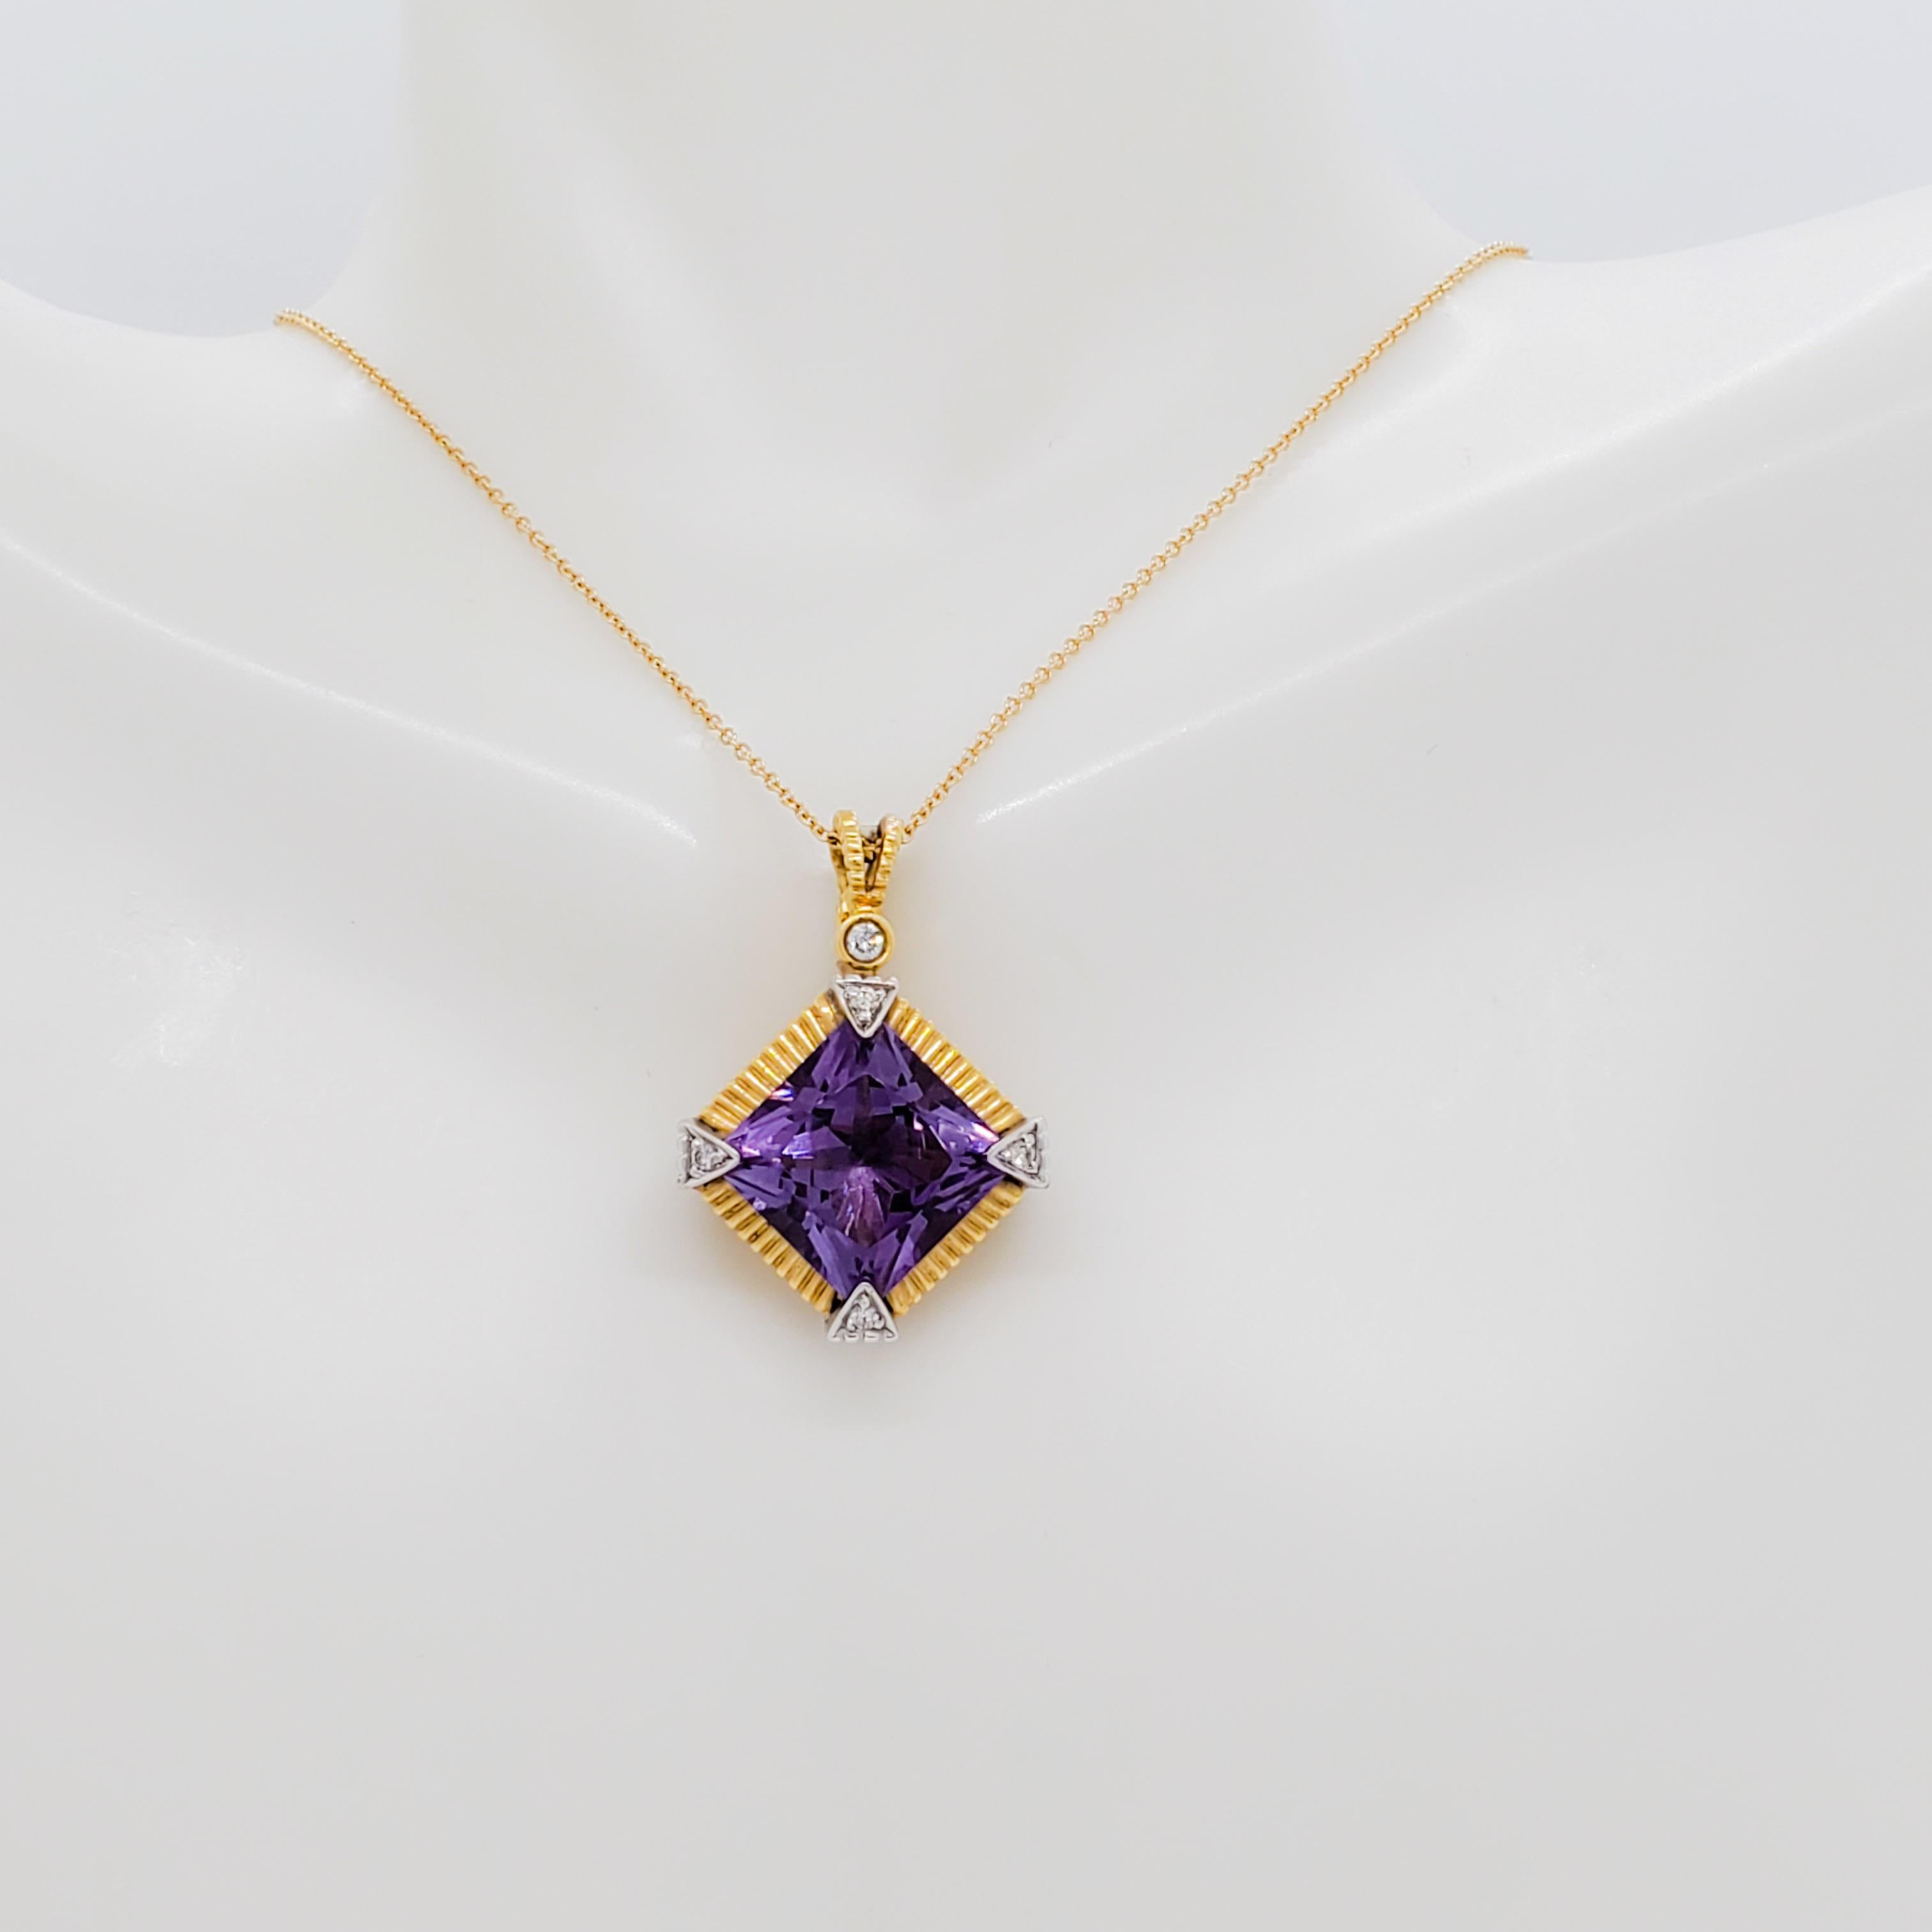 Princess Cut Estate Amethyst and Diamond Pendant Necklace in 18k Gold